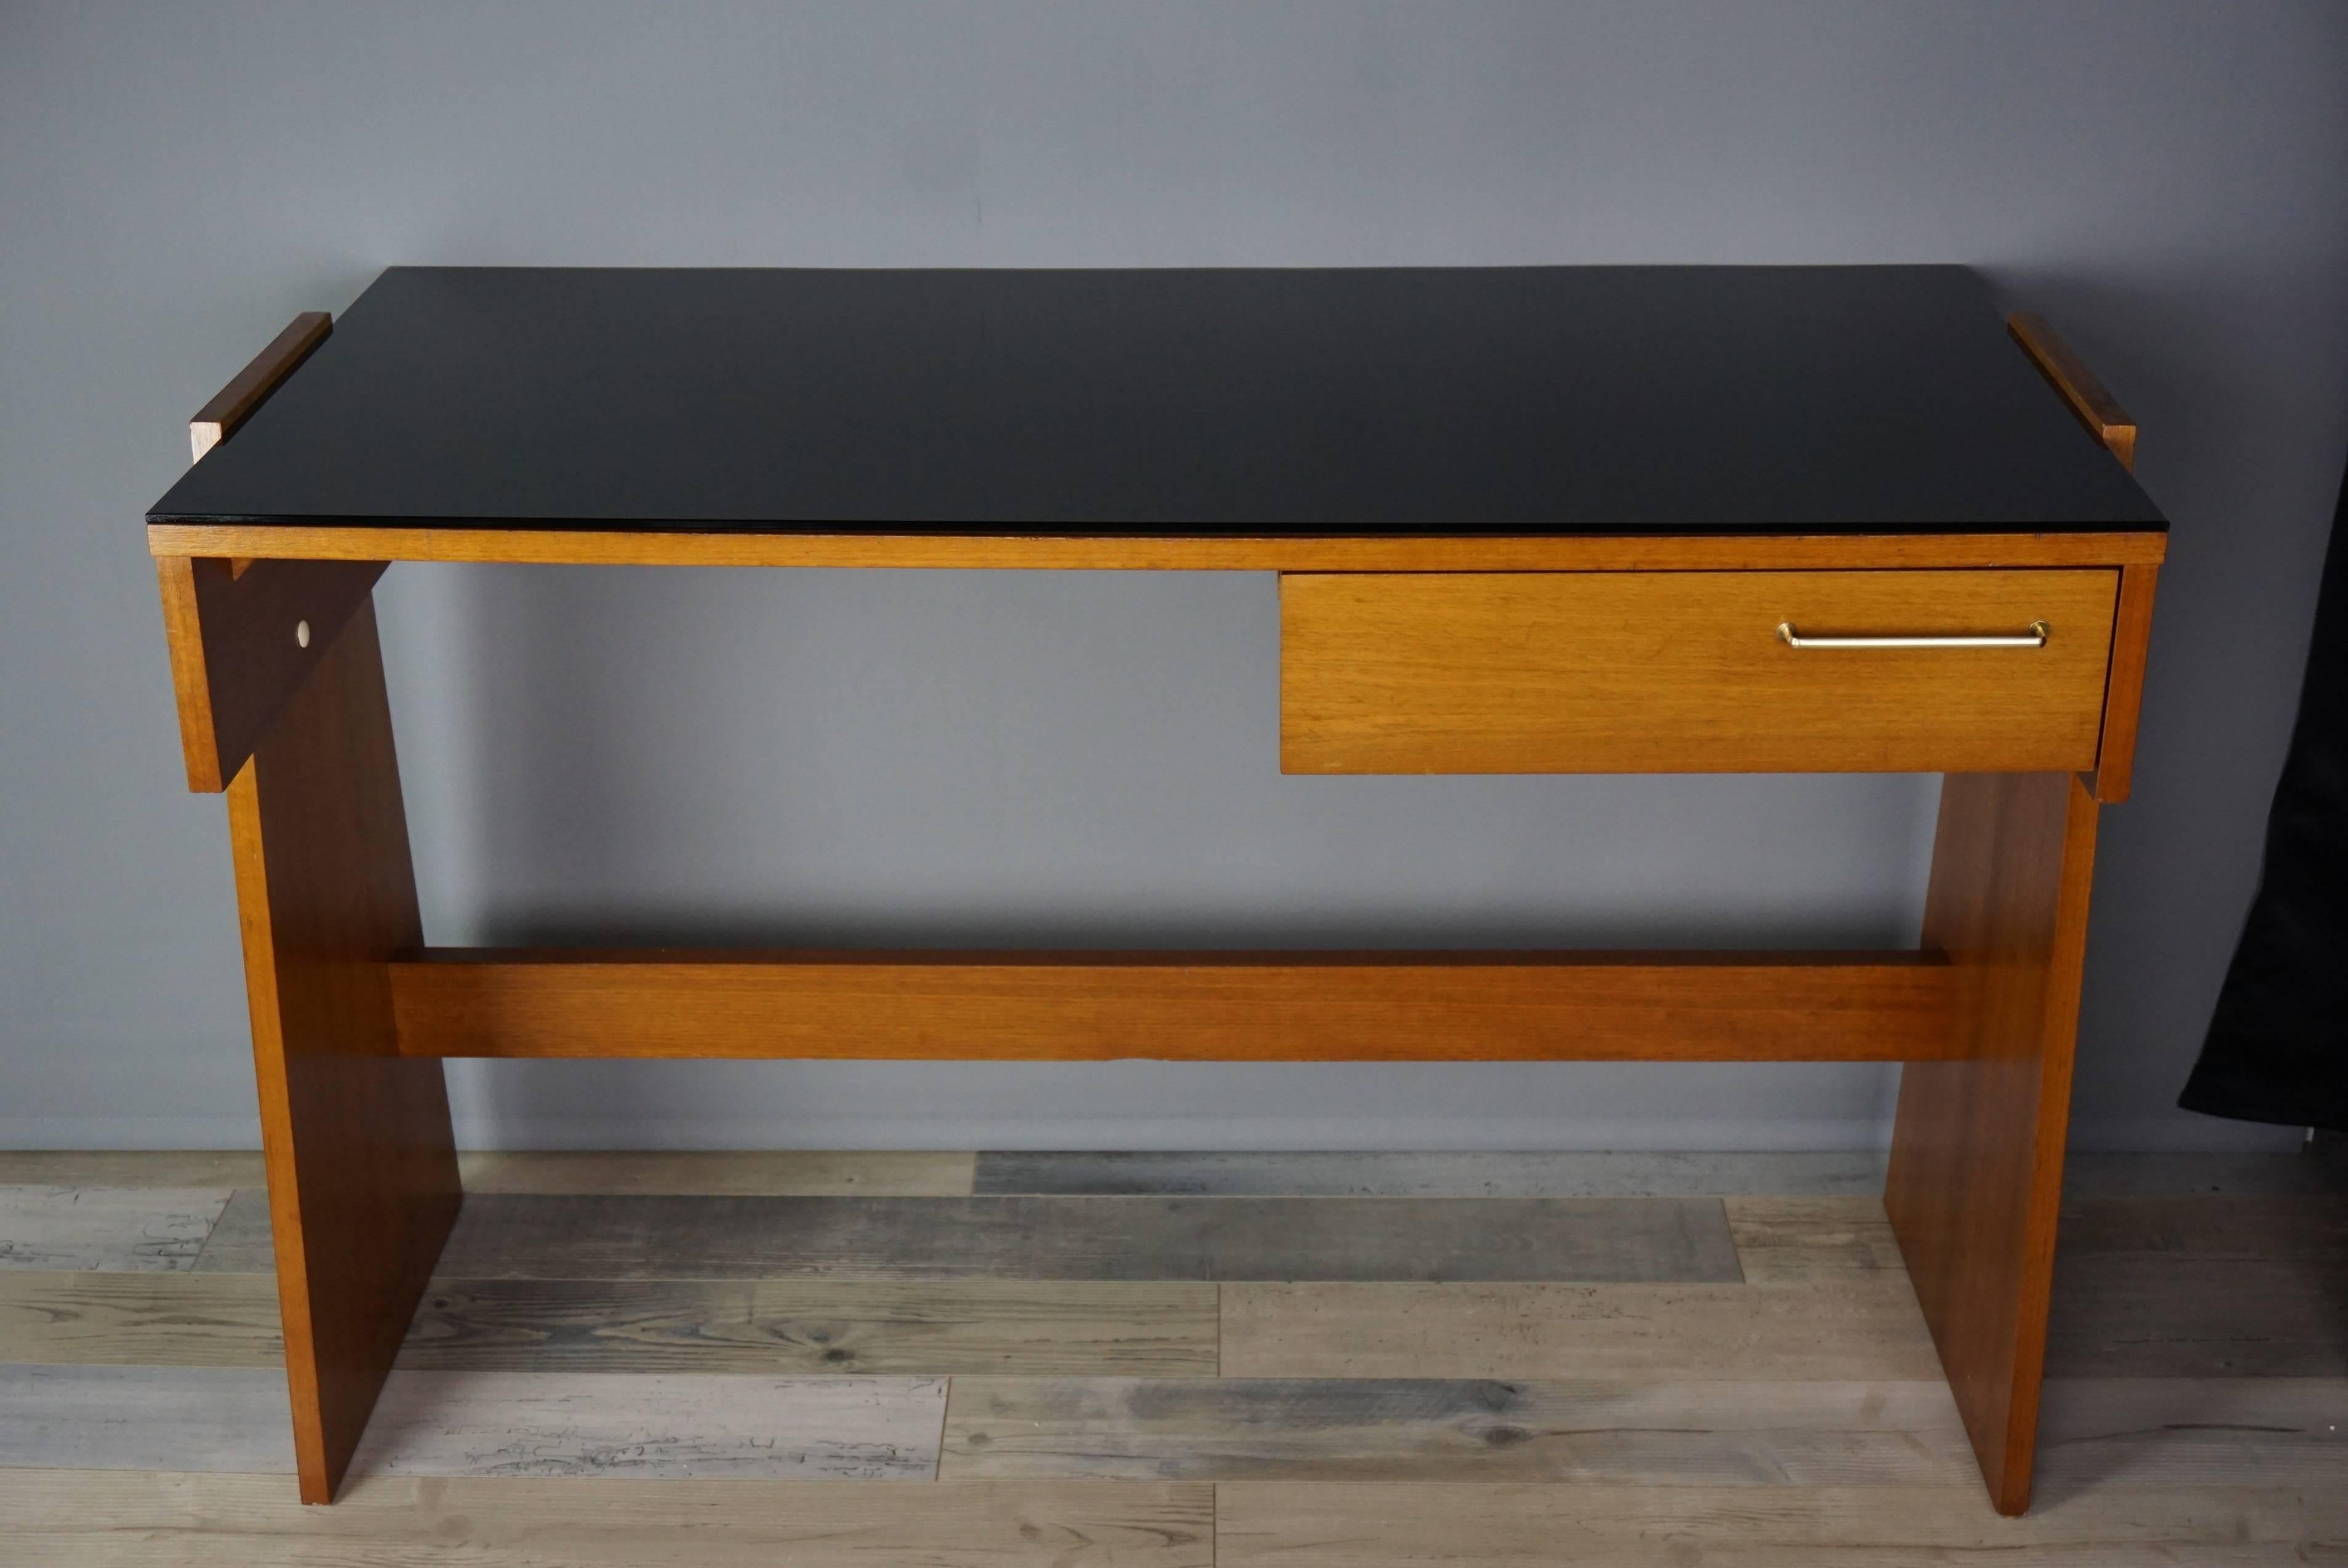 
Teak desk and black glass top, original and offering a large work surface. Atypical profile, minimalist and sober line.